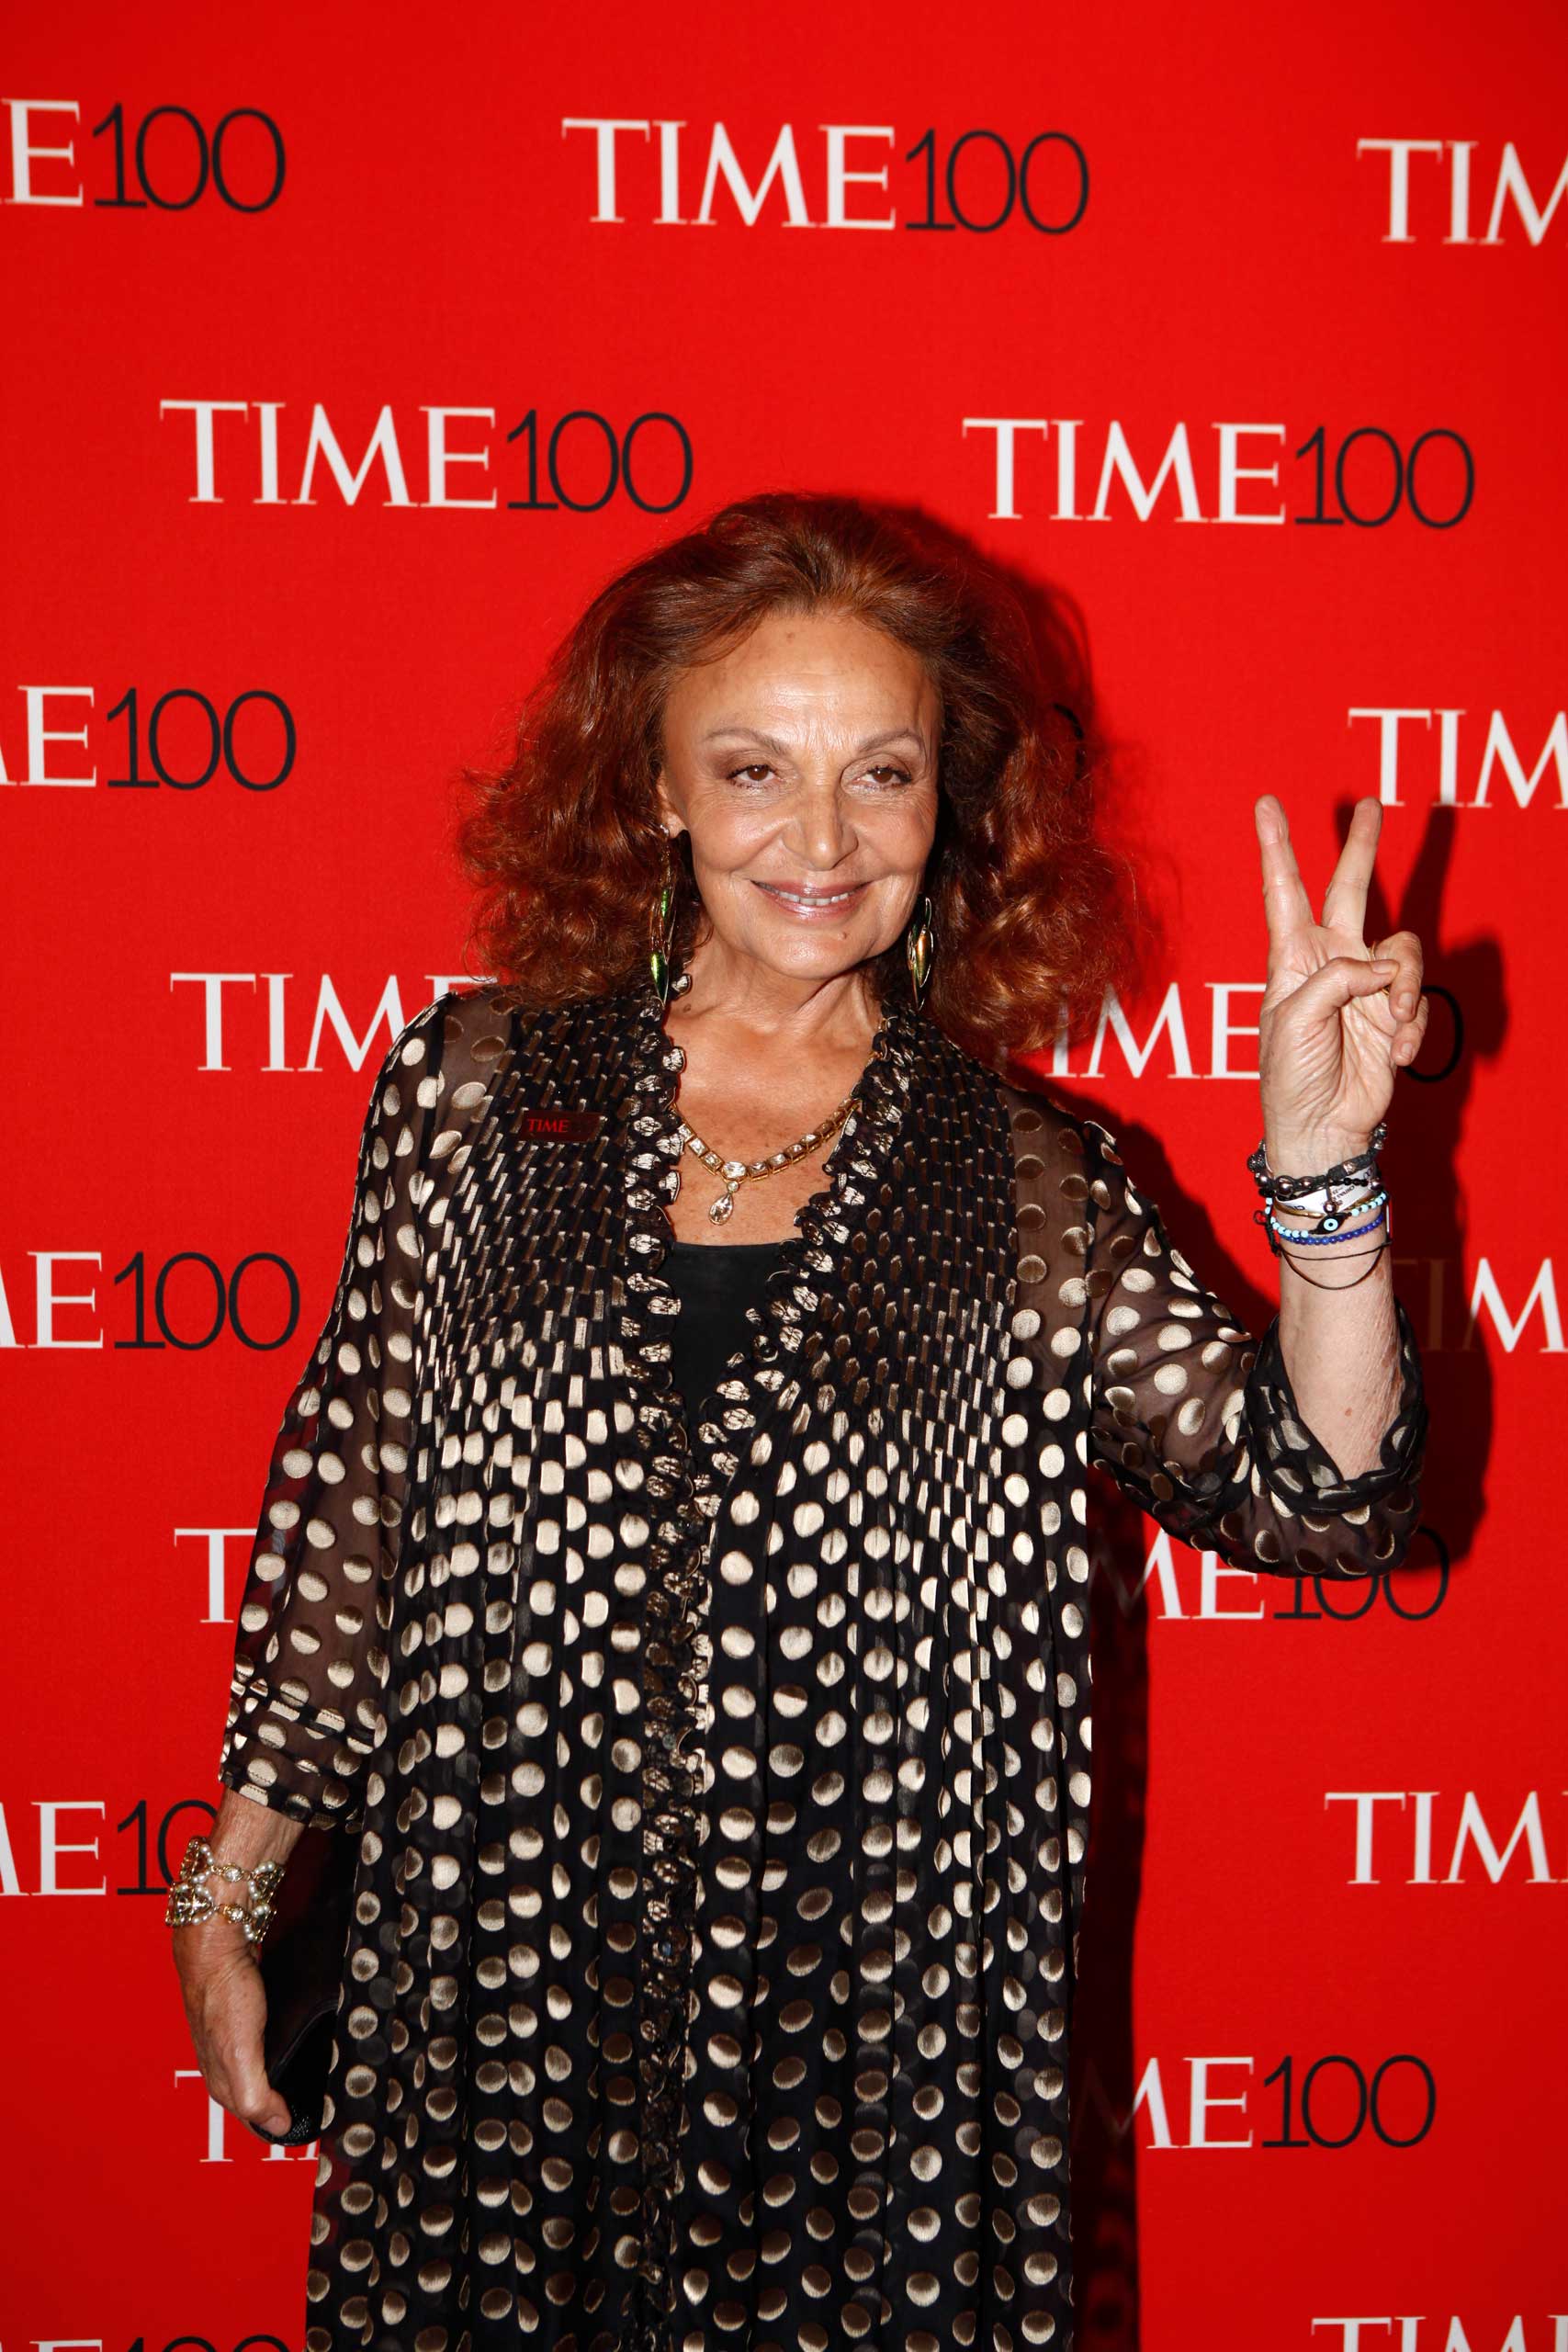 Diane Von Furstenberg attends the TIME 100 Gala at Lincoln Center in New York City on Apr. 21, 2015.